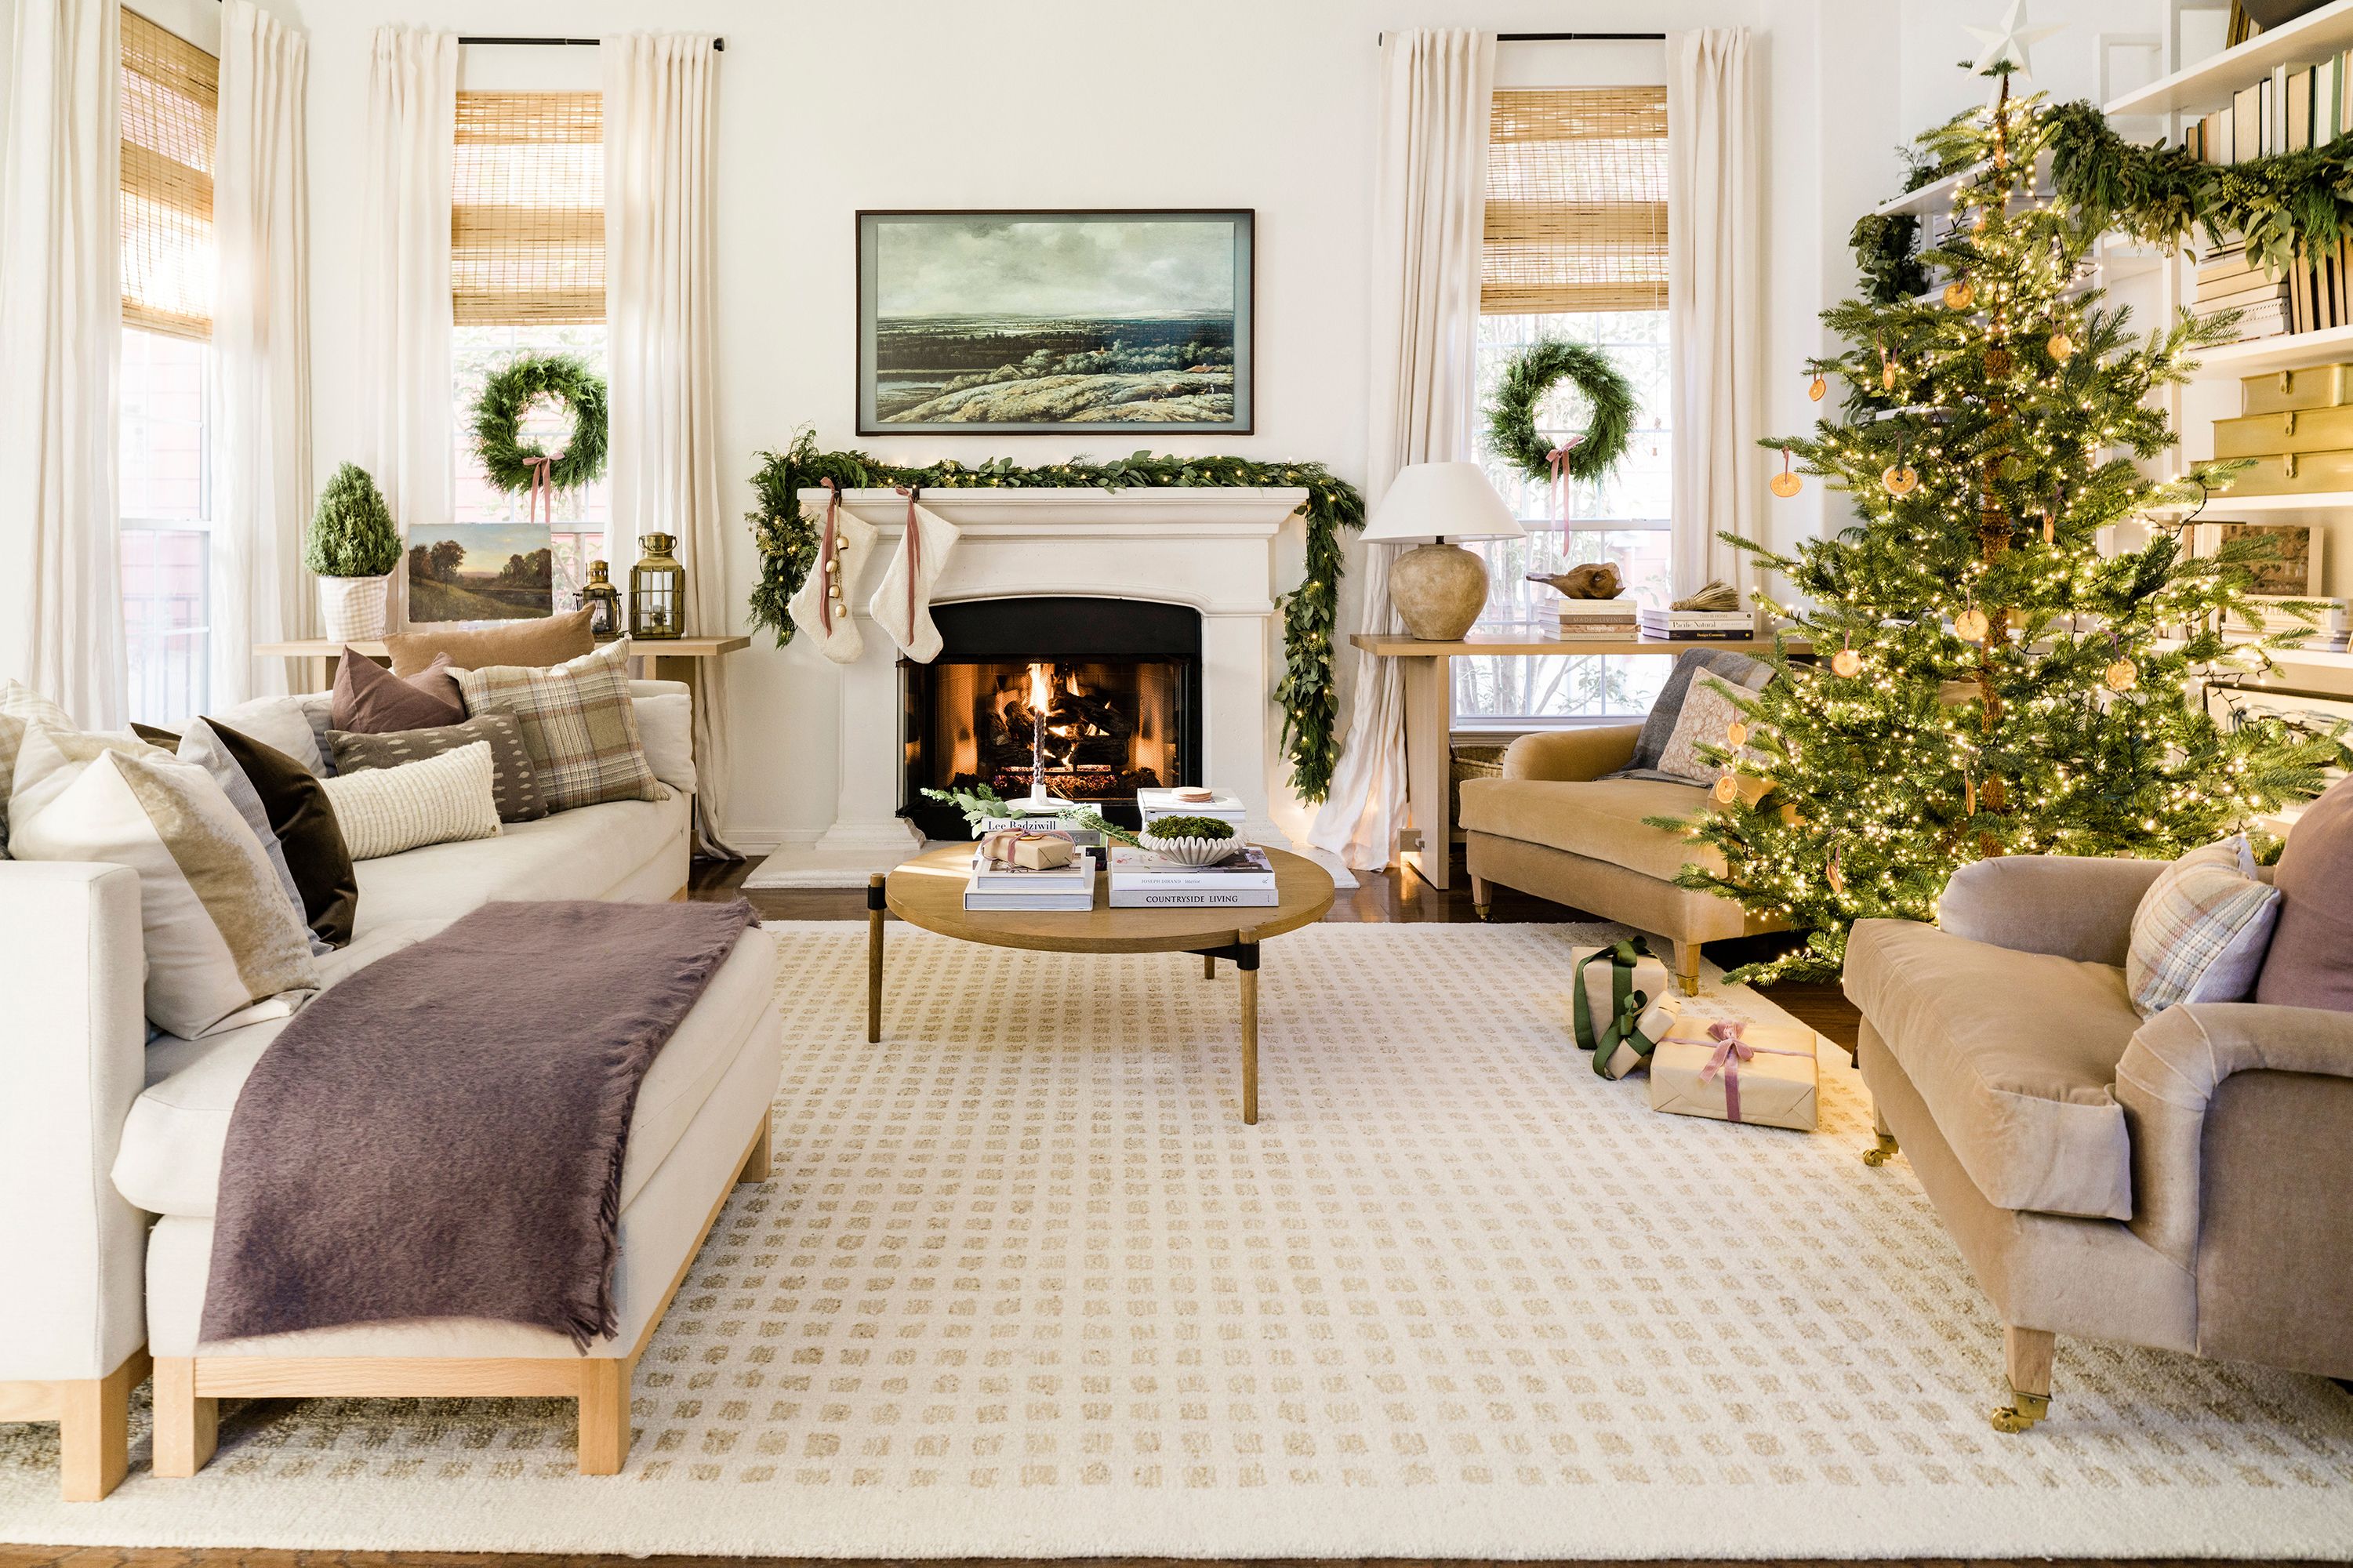 https://hips.hearstapps.com/hmg-prod/images/the-identite-collective-holiday-home-tour-202107-1663186928.jpg